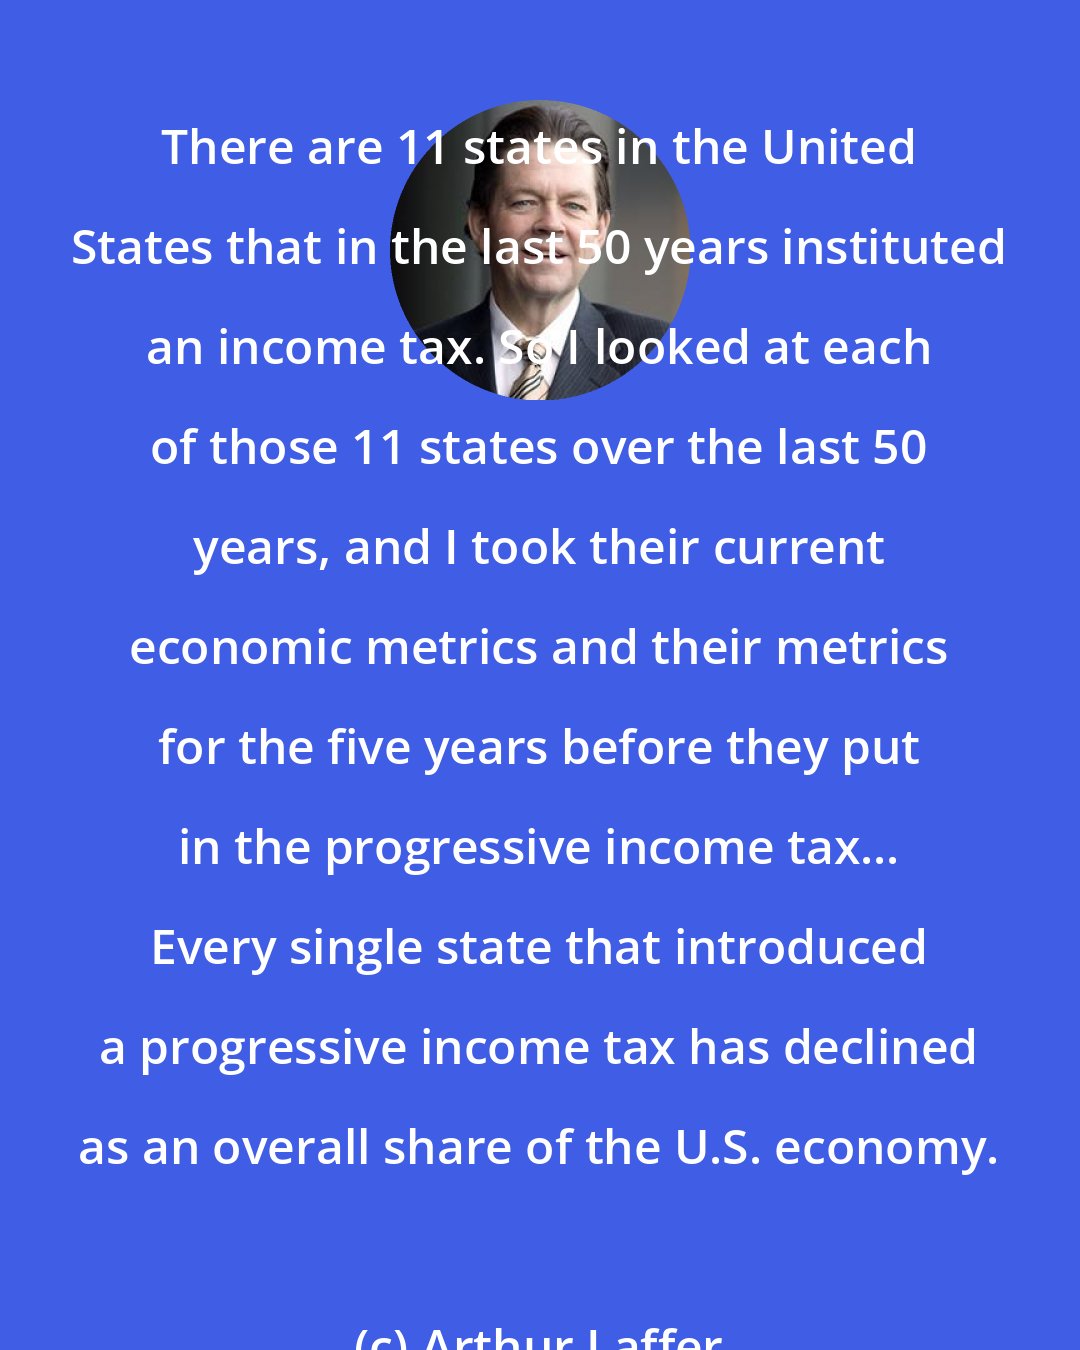 Arthur Laffer: There are 11 states in the United States that in the last 50 years instituted an income tax. So I looked at each of those 11 states over the last 50 years, and I took their current economic metrics and their metrics for the five years before they put in the progressive income tax... Every single state that introduced a progressive income tax has declined as an overall share of the U.S. economy.